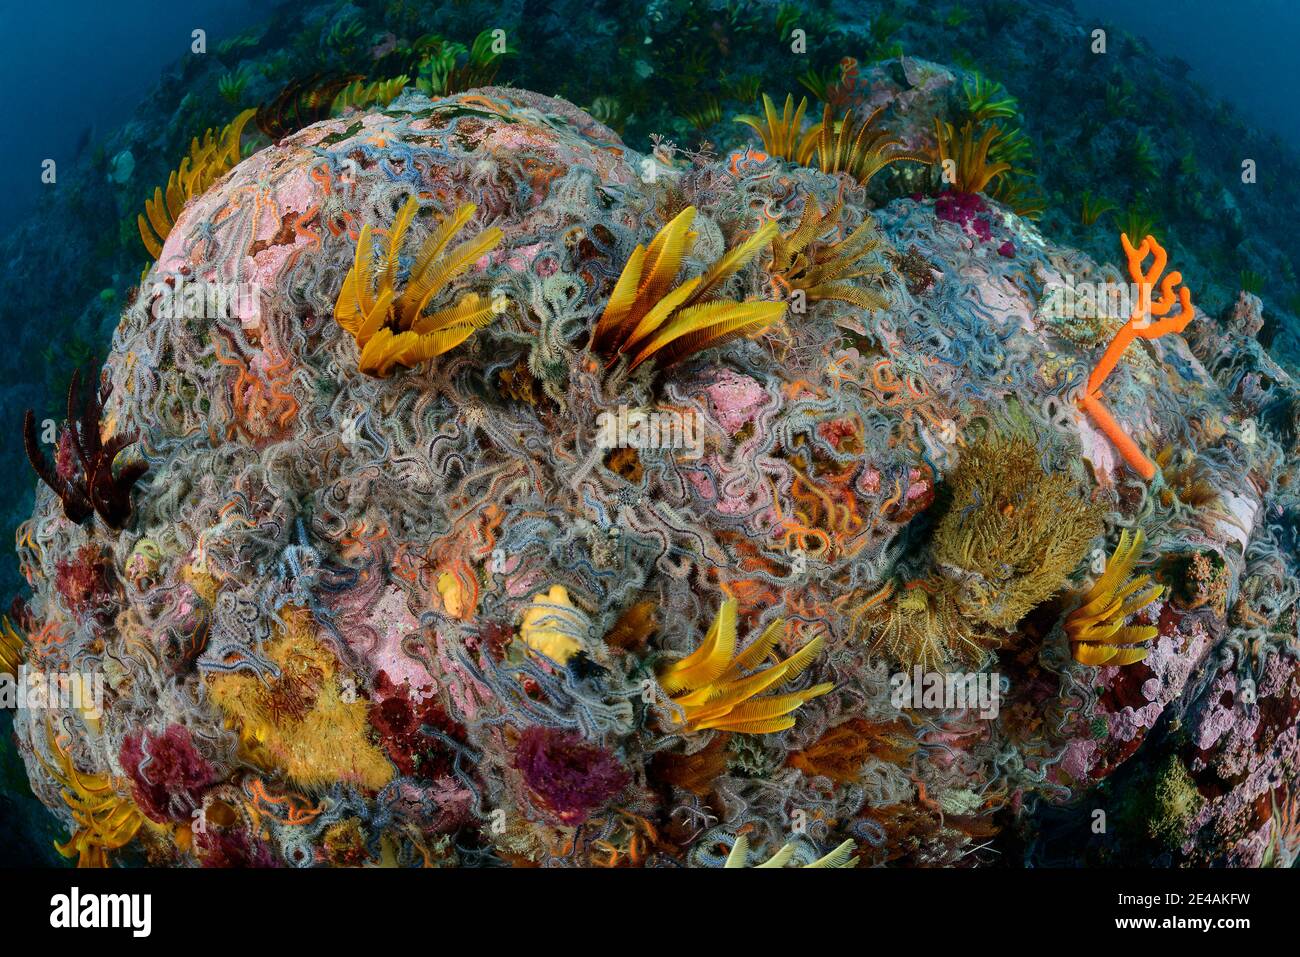 Coral reef with brittle stars, crinoidea (class) and feather stars Ophiuroidea (class), False Bay, Simons Town, South Africa, Indian Ocean Stock Photo